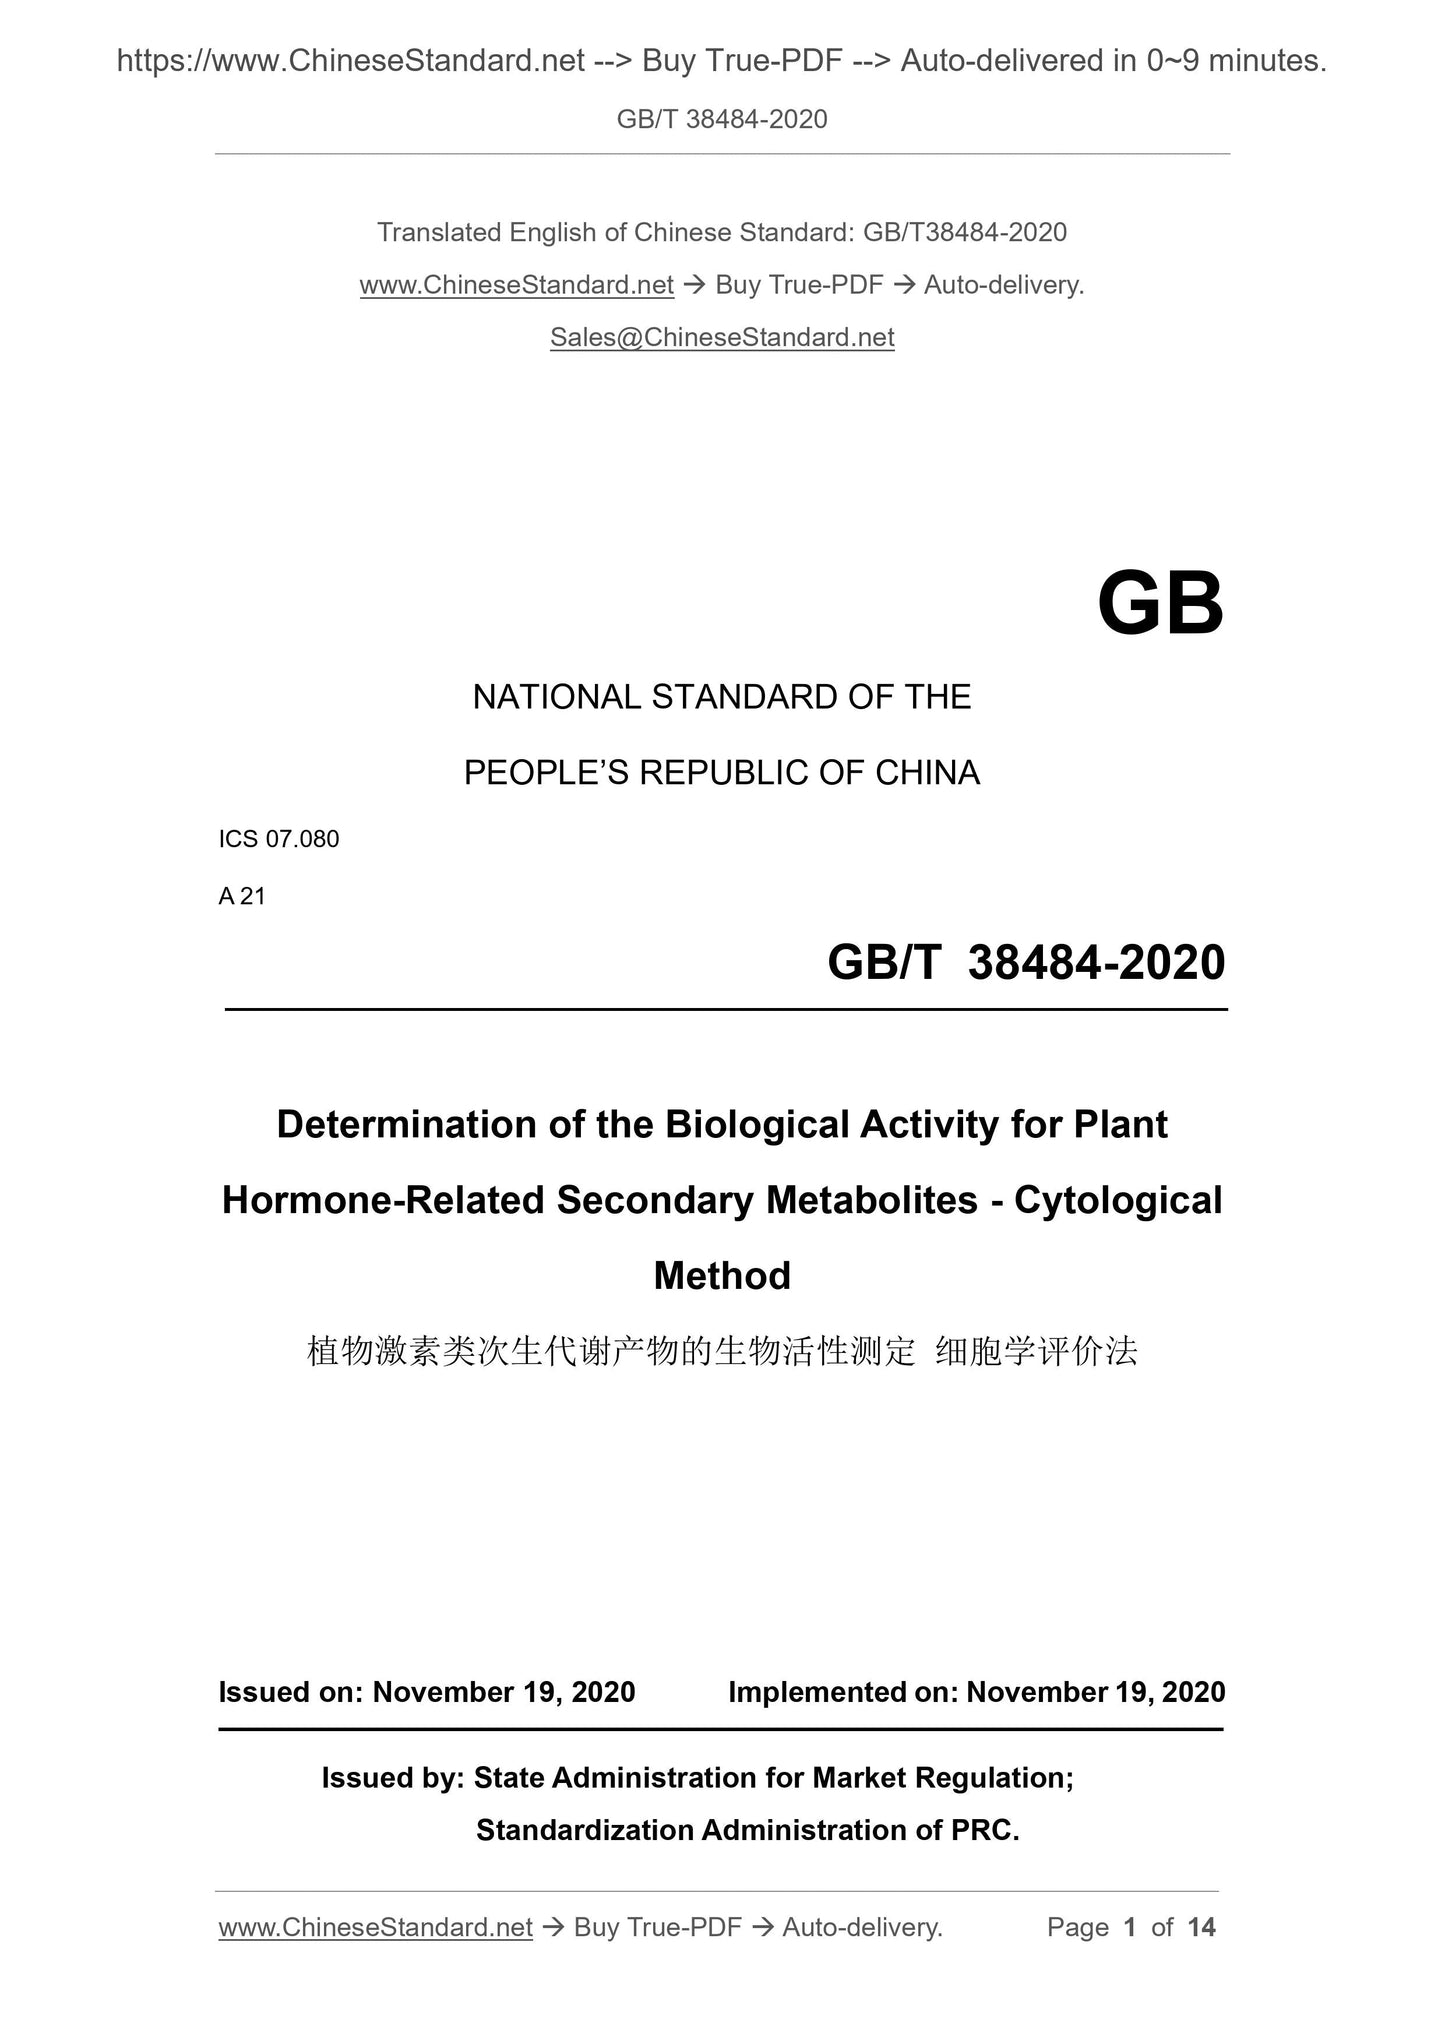 GB/T 38484-2020 Page 1